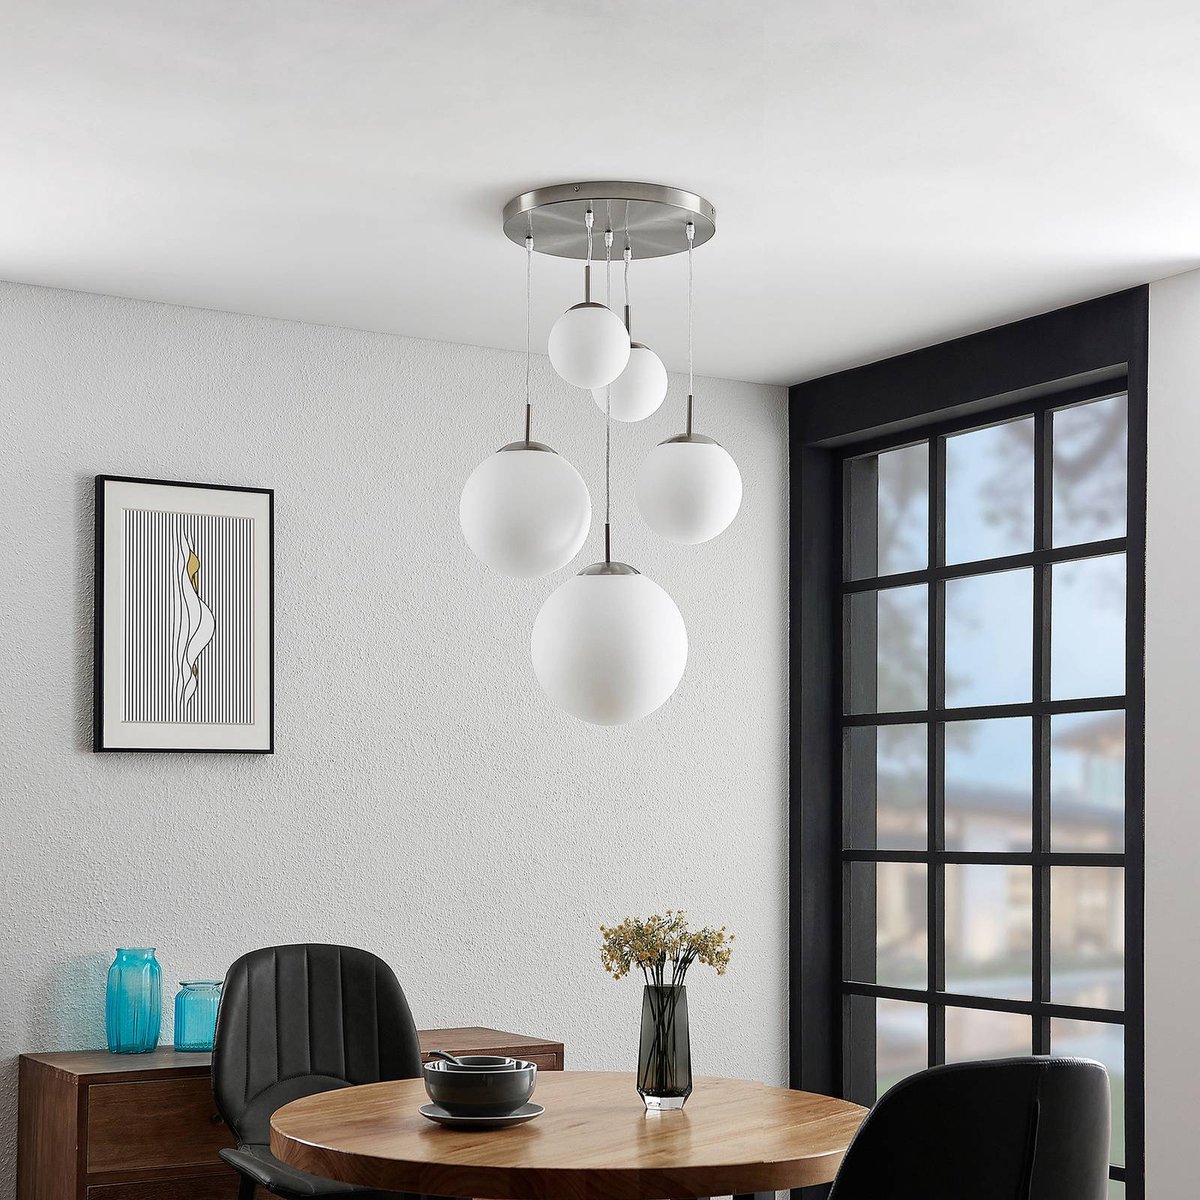 Lindby - hanglamp - 5 lichts - metaal, glas - E27 - mat nikkel, opaal wit